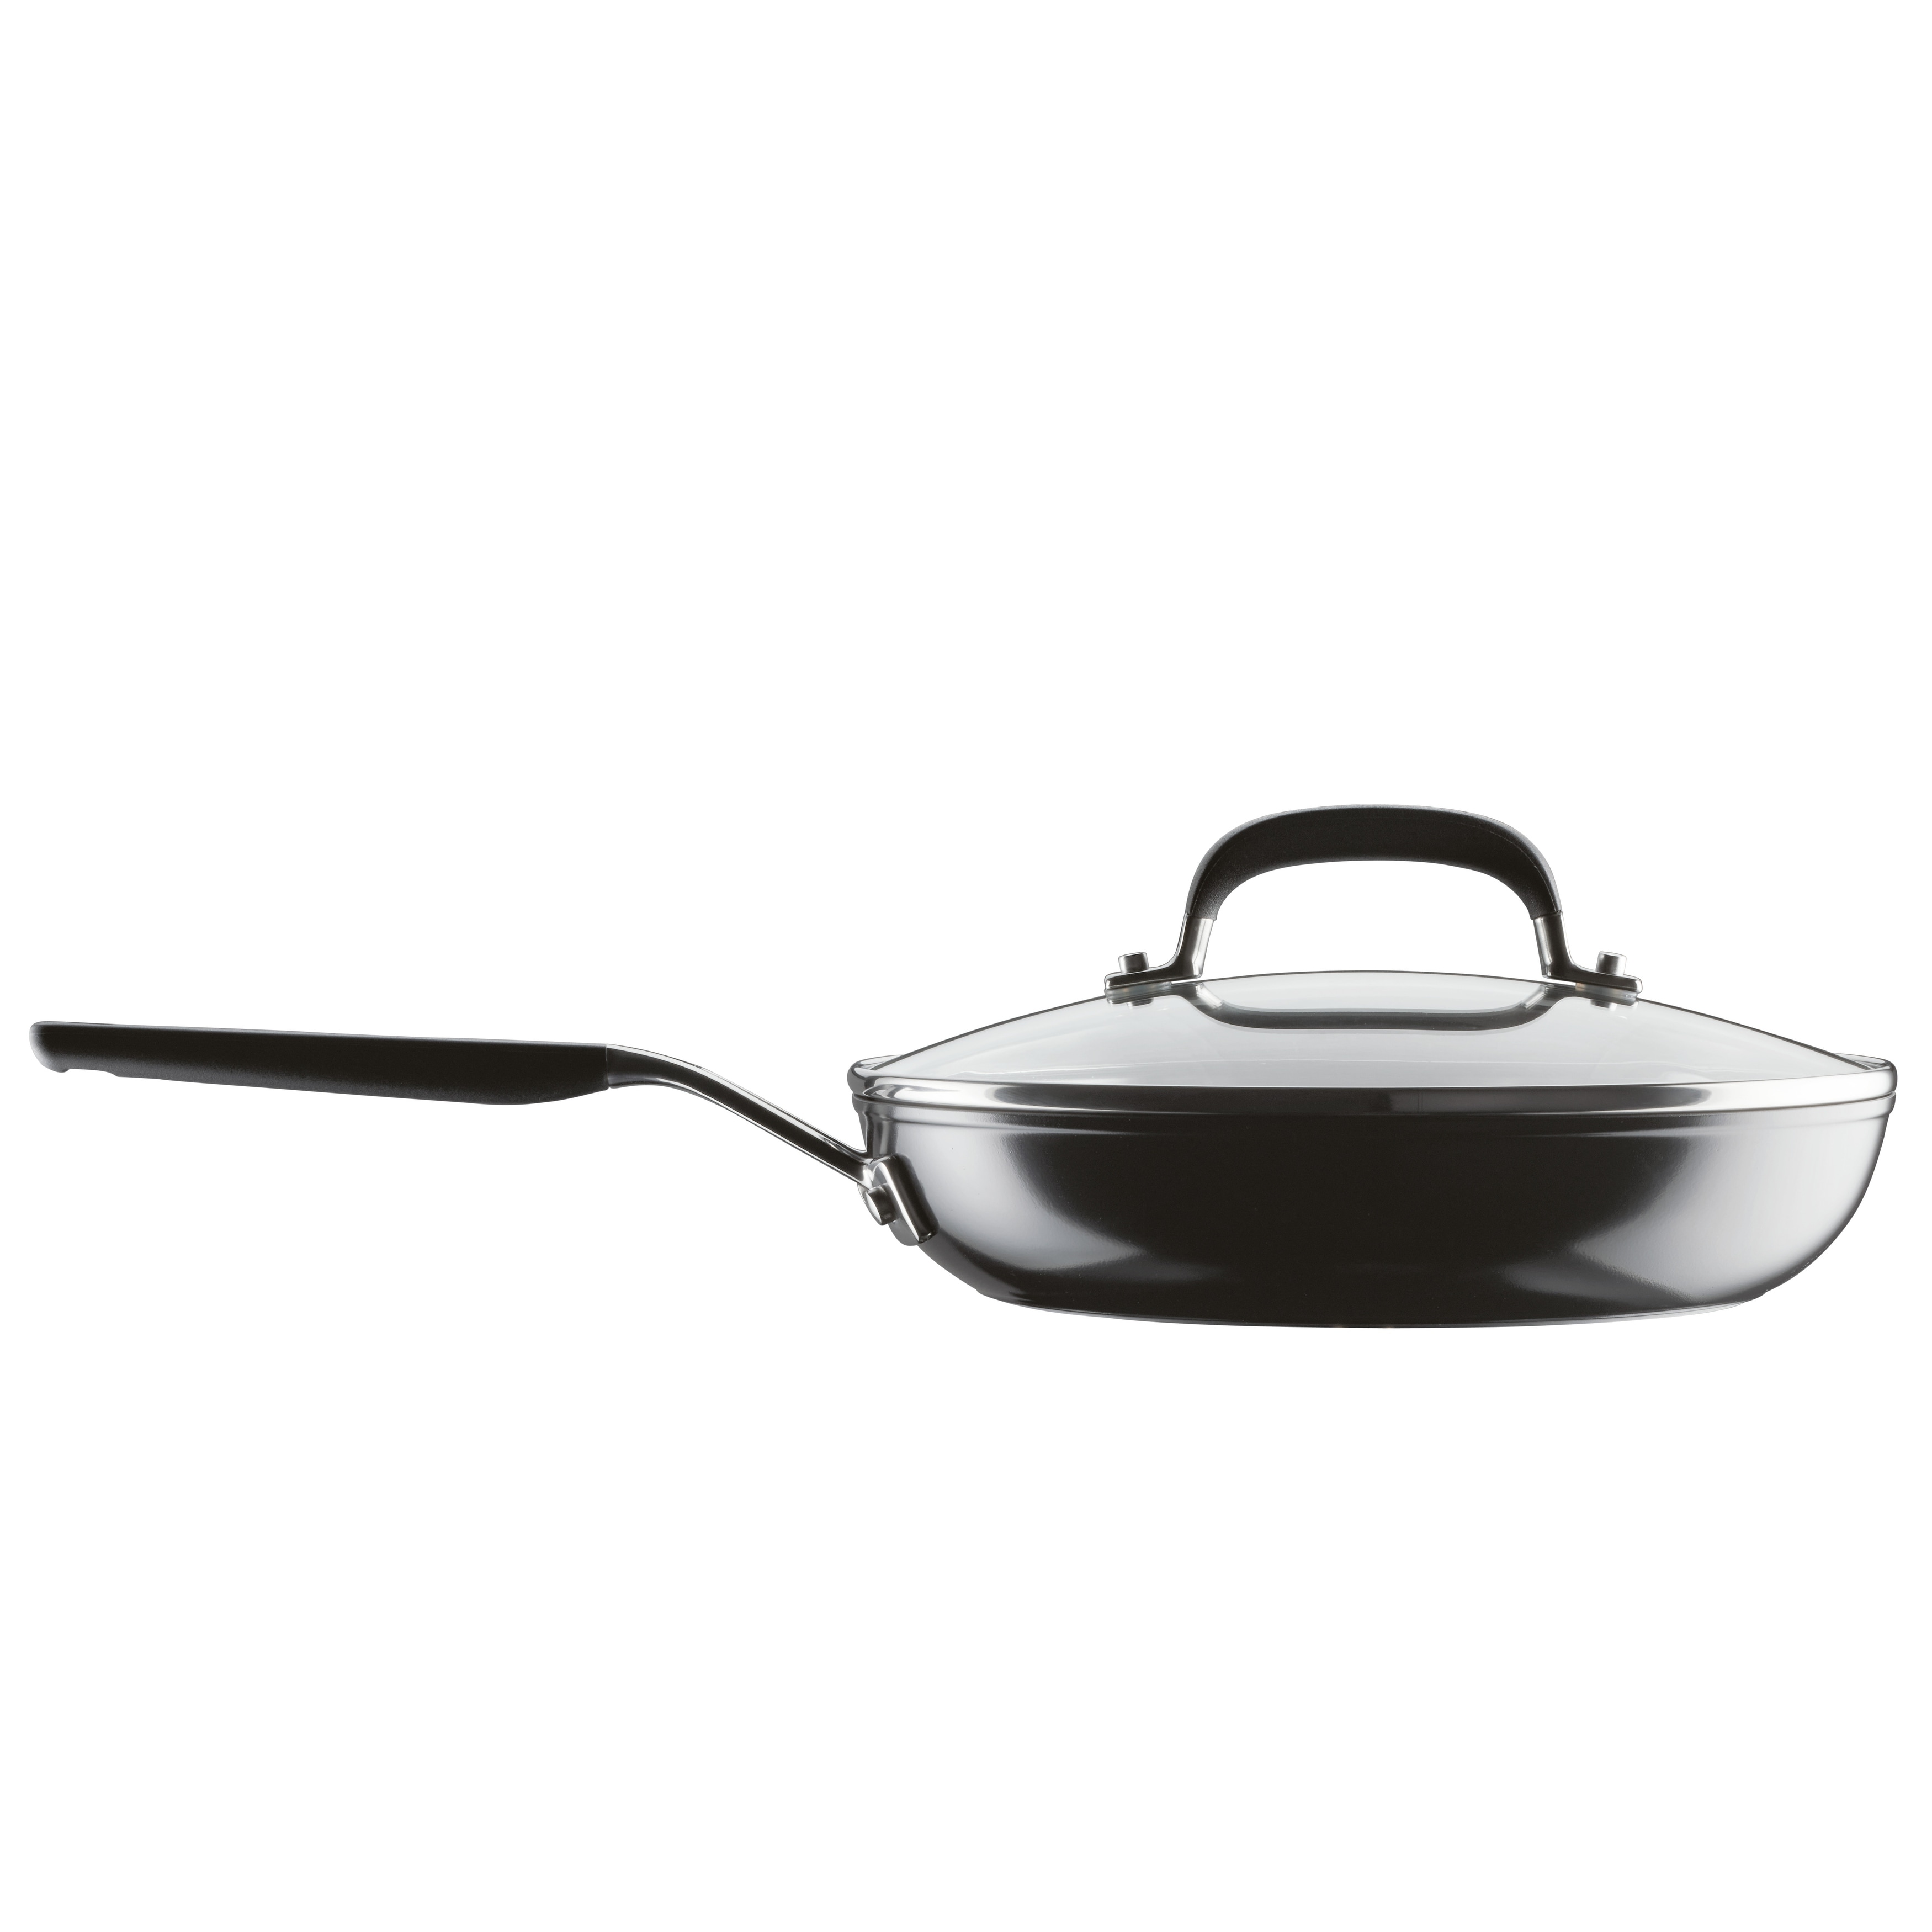 https://ak1.ostkcdn.com/images/products/is/images/direct/8ef6e1c7693dbe80f7c6d087f44ab24084331b46/KitchenAid-Hard-Anodized-Nonstick-Cookware-Pots-and-Pans-Set%2C-10-Piece%2C-Onyx-Black.jpg